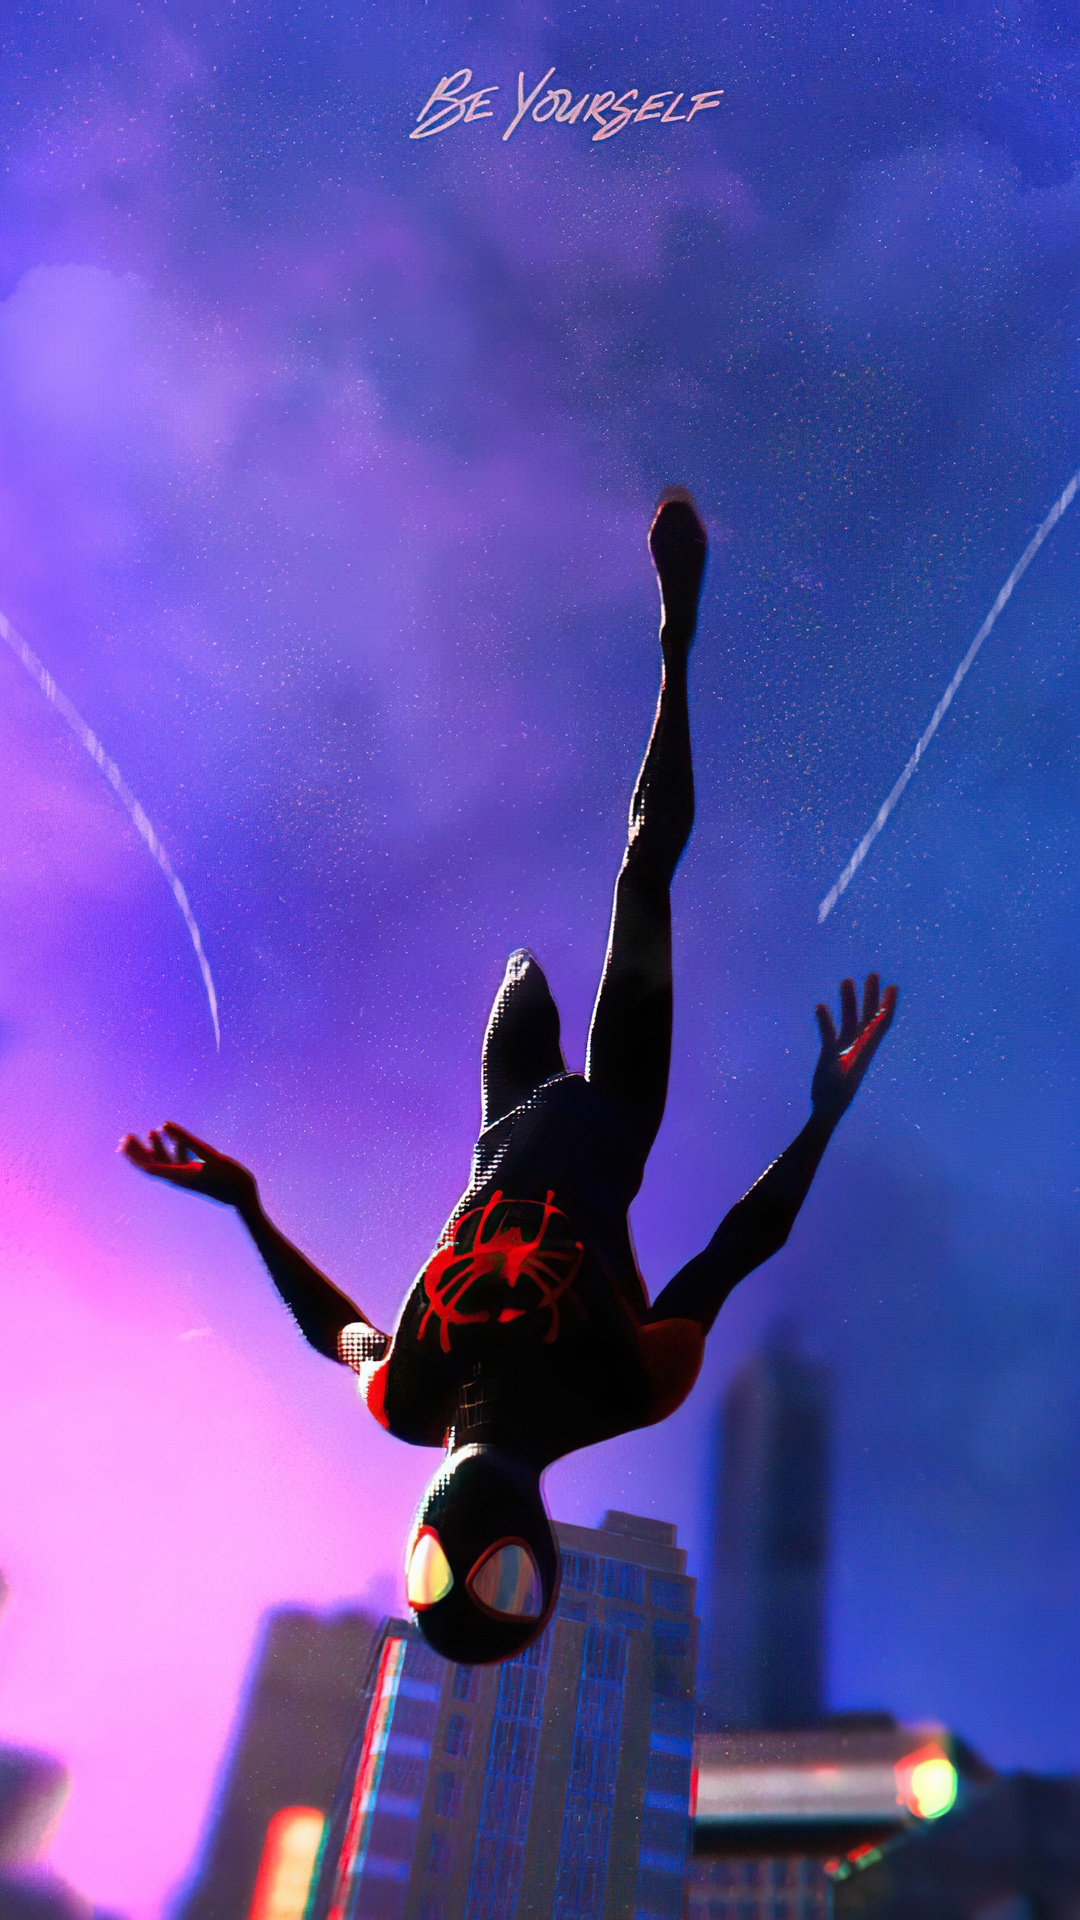 HD Miles Morales Spider Man Wallpaper For Phone